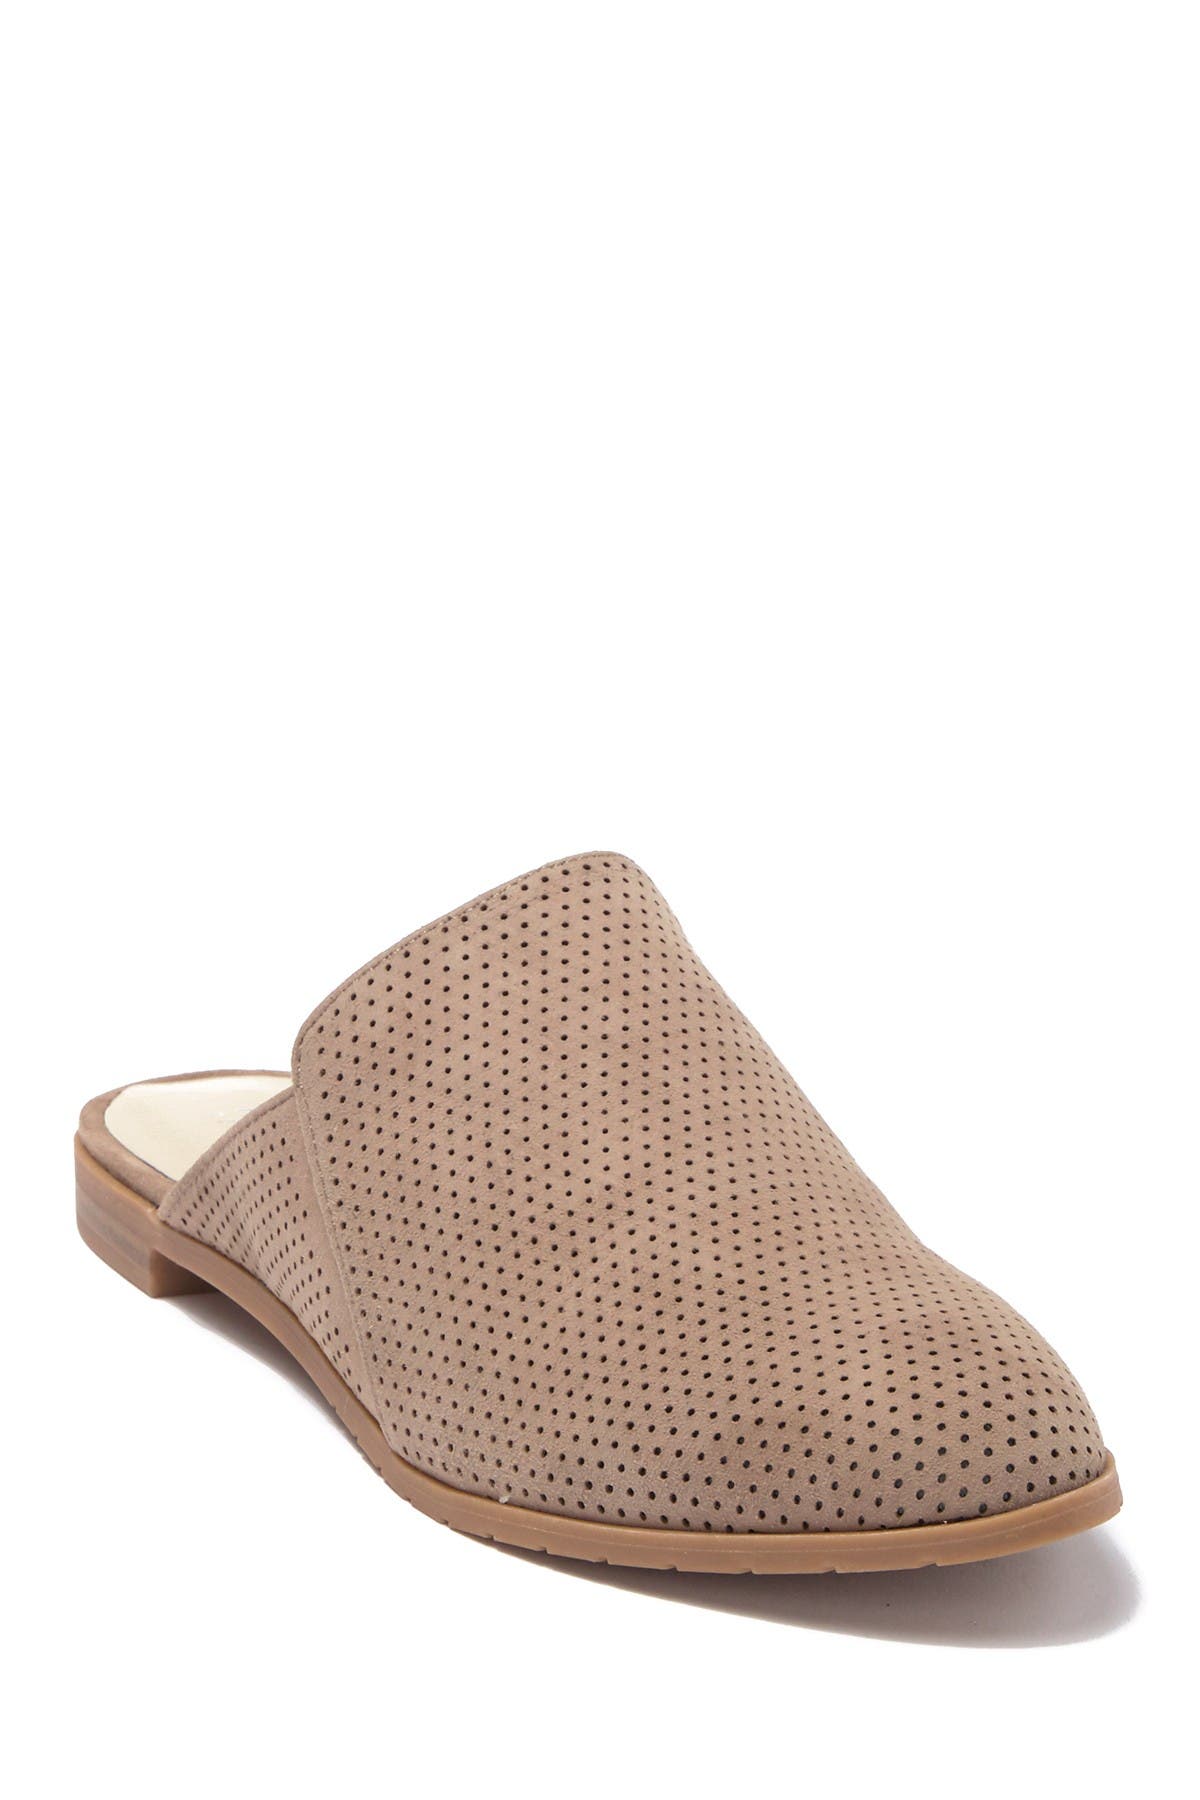 Ruthie Perforated Suede Mule Flat 